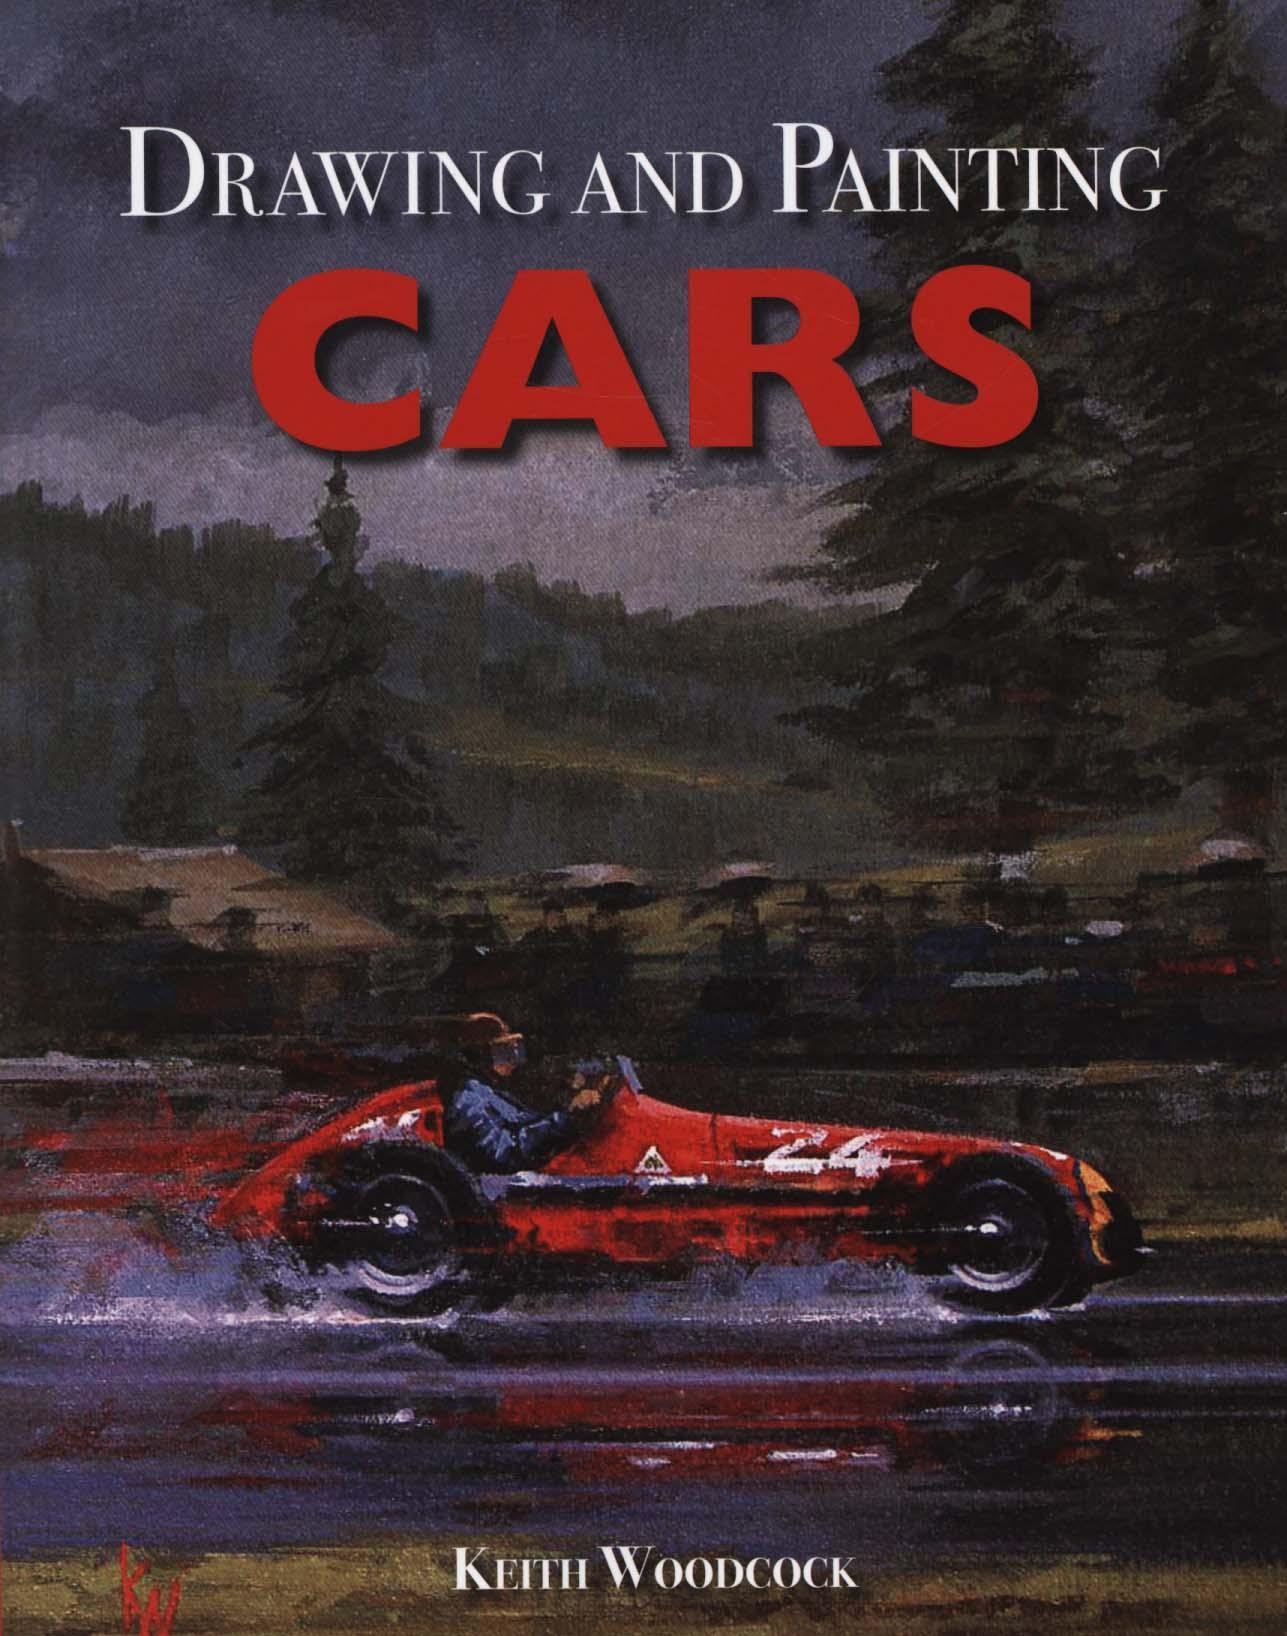 Drawing and Painting Cars - Keith Woodcock